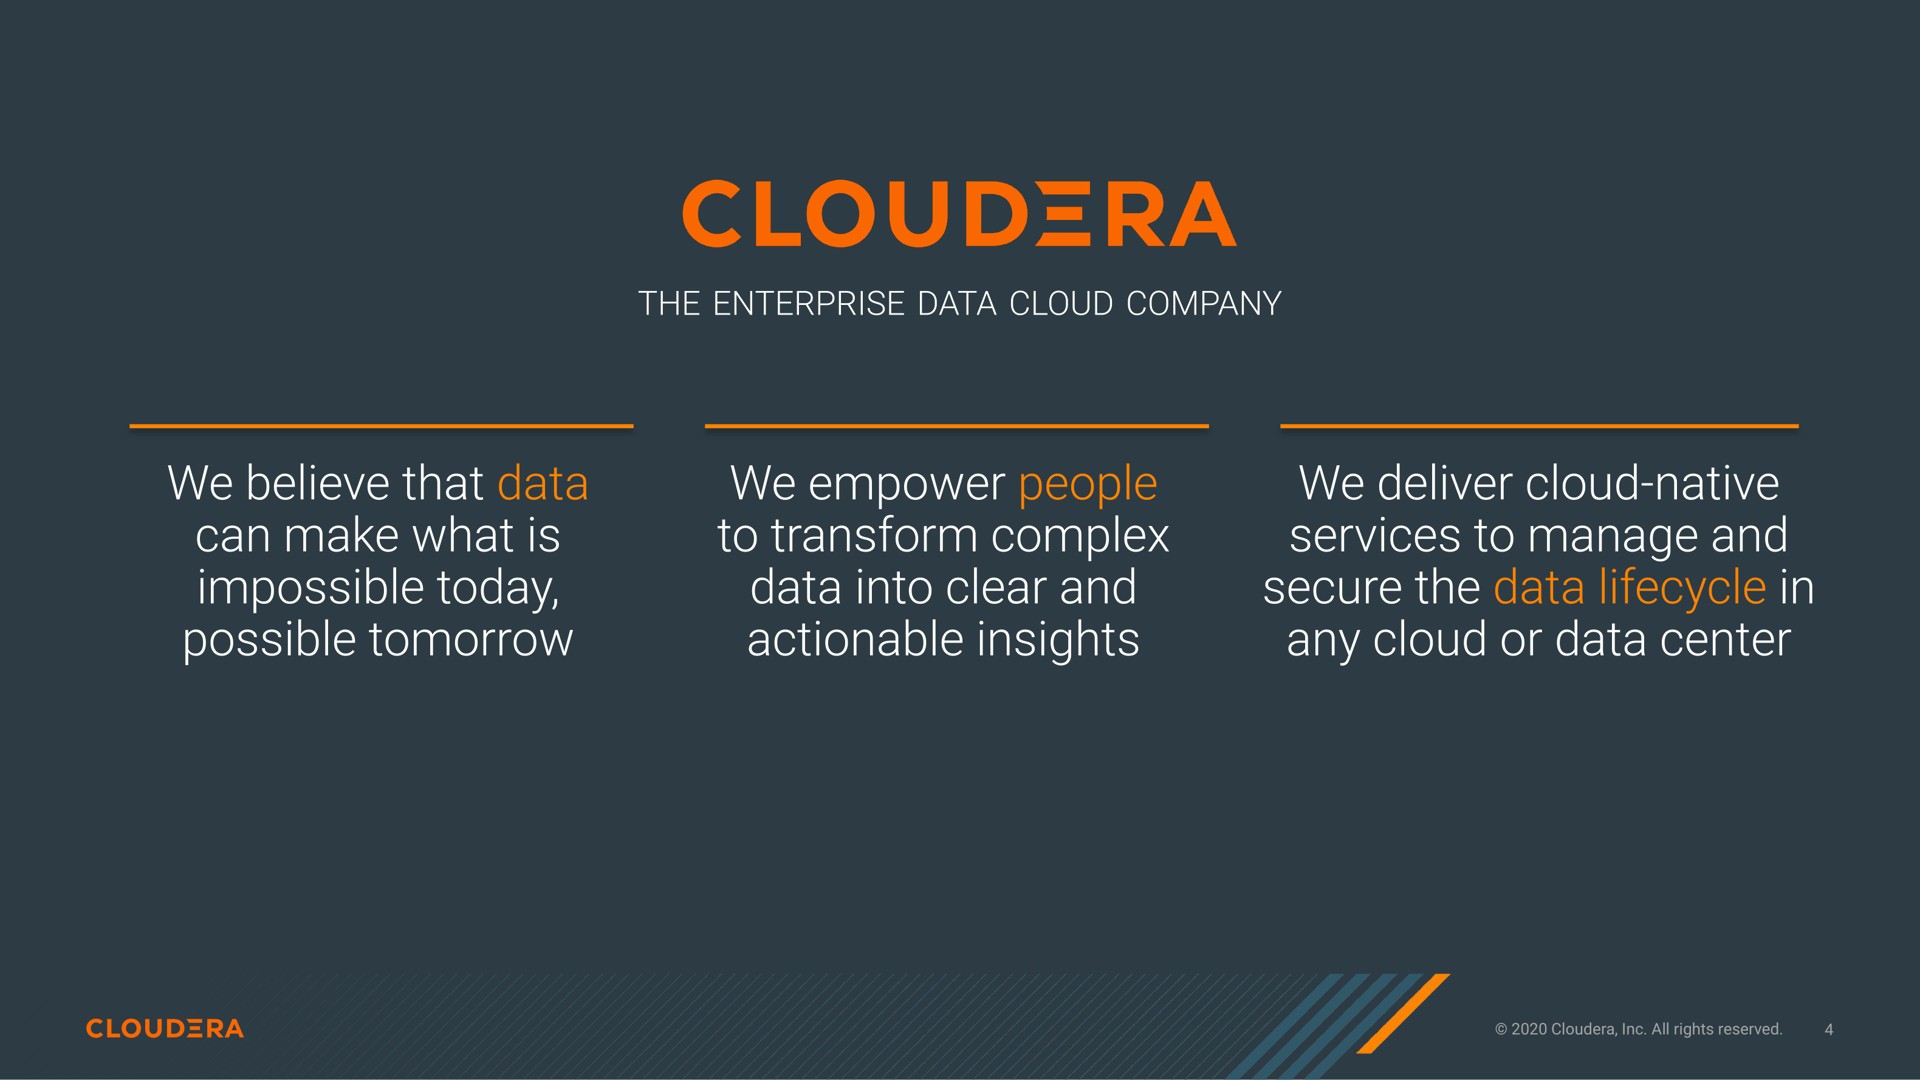 cloud can make what is impossible today possible tomorrow to transform complex data into clear and actionable insights services to manage and secure the data in any cloud or data center | Cloudera